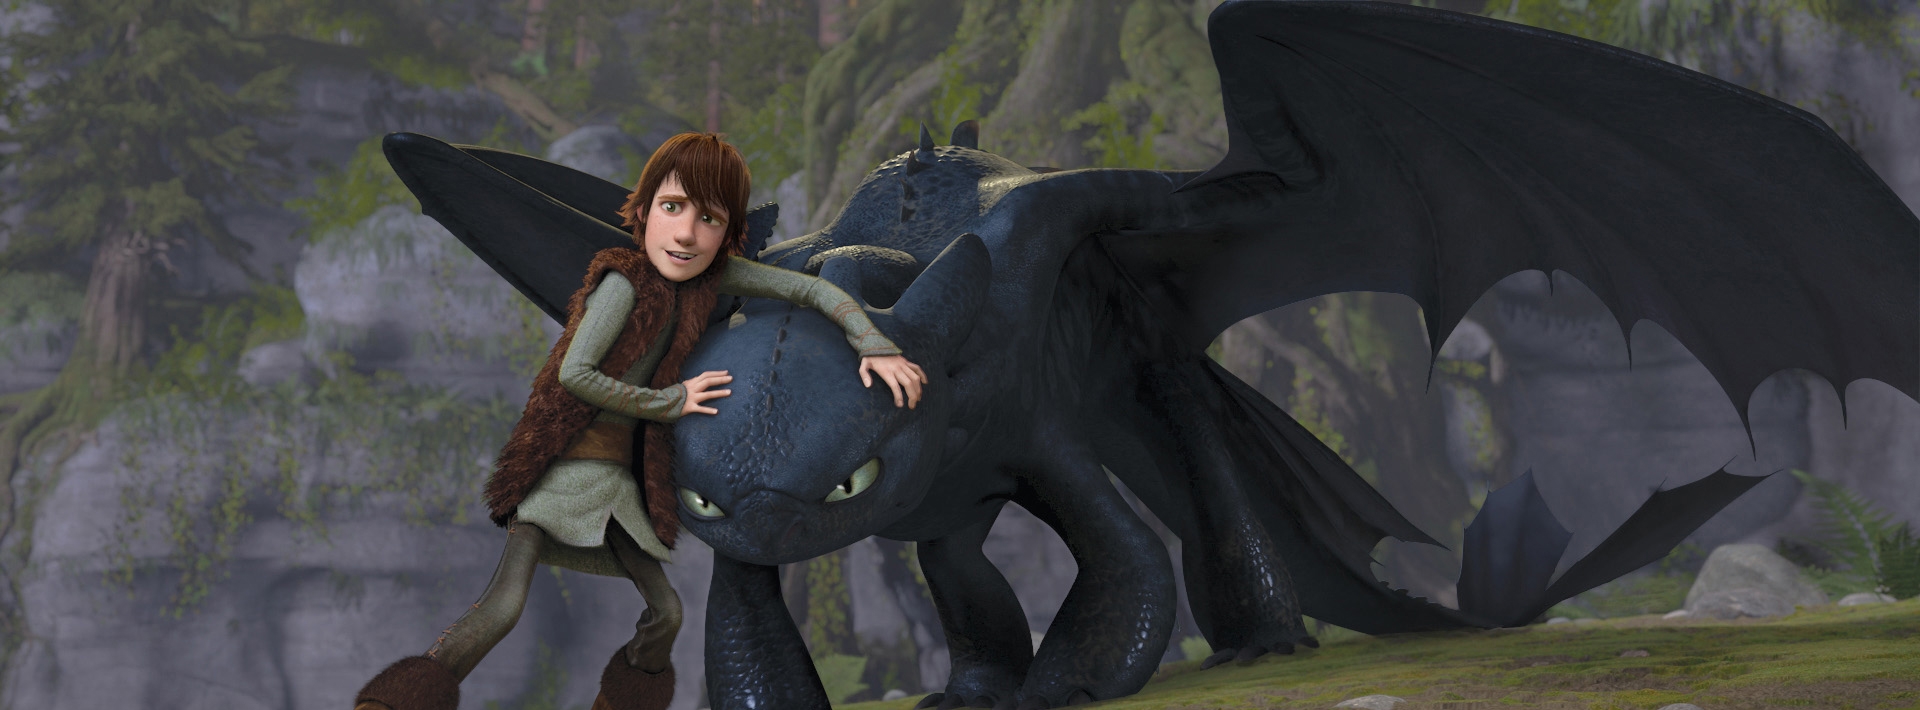 How To Train Your Dragon Blu-ray Steelbook is releasing as a Zavvi Exclusive